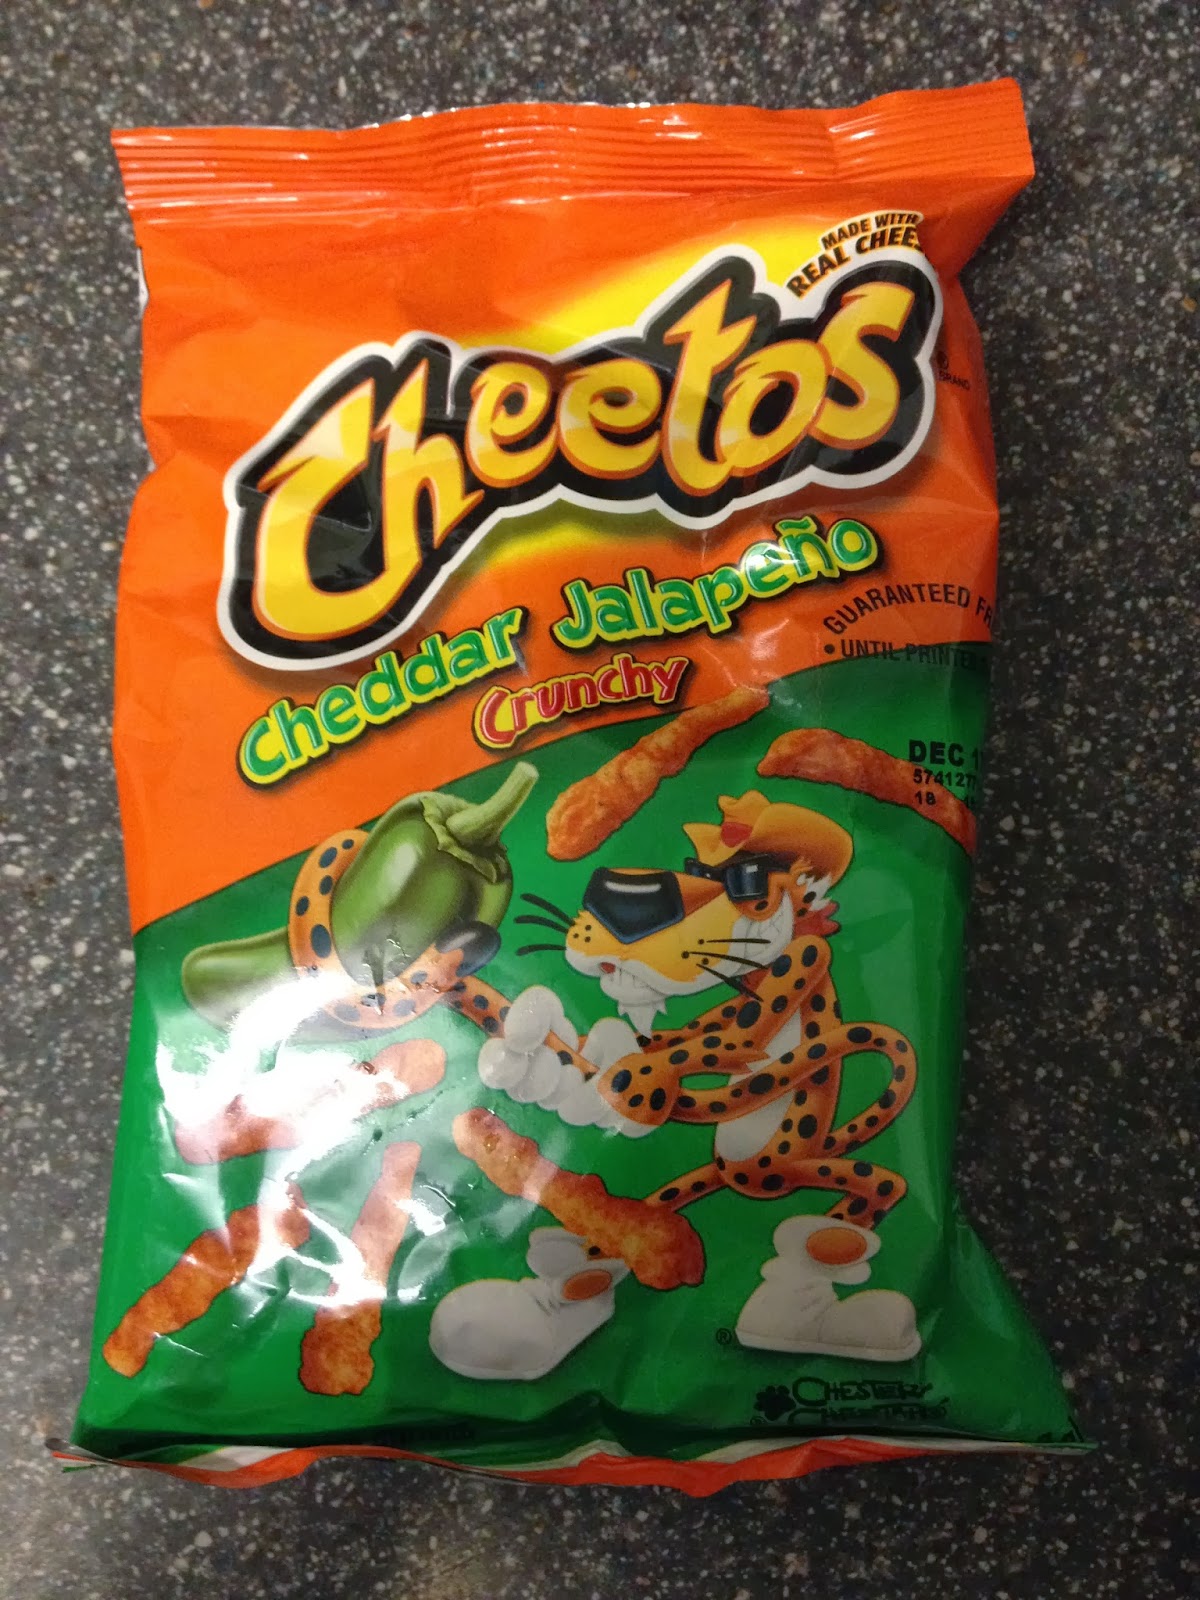 A Review A Day: Today's Review: Cheetos Crunchy Cheddar Jalapeño.